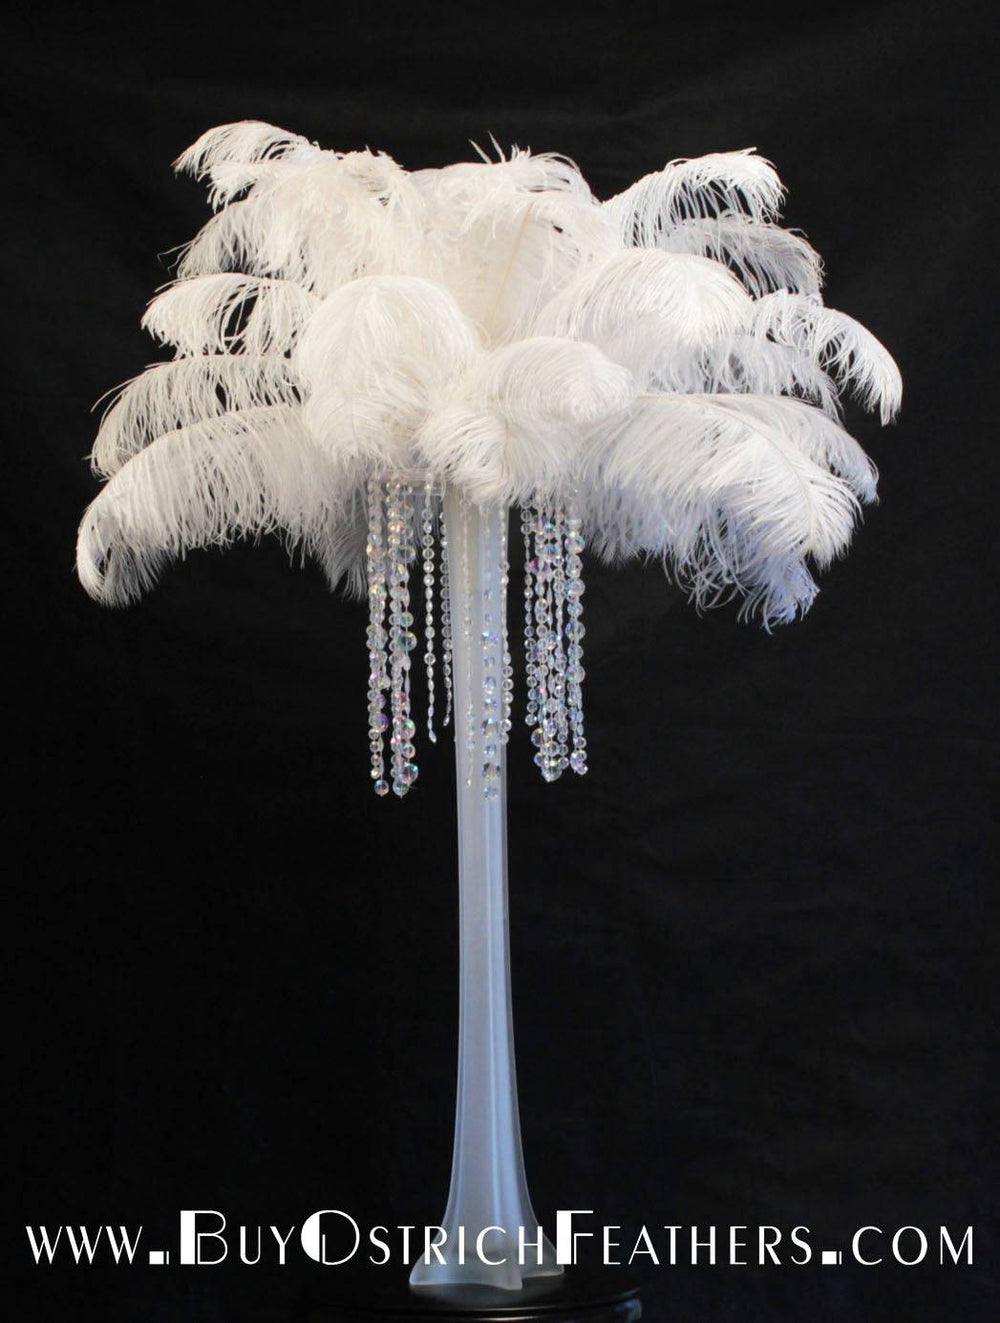 Bulk Special BLACK Ostrich Feathers Centerpiece Tail Feathers.  Approximately 1/2 Lb. of Ostrich Tail Feathers 12-16 Long. 